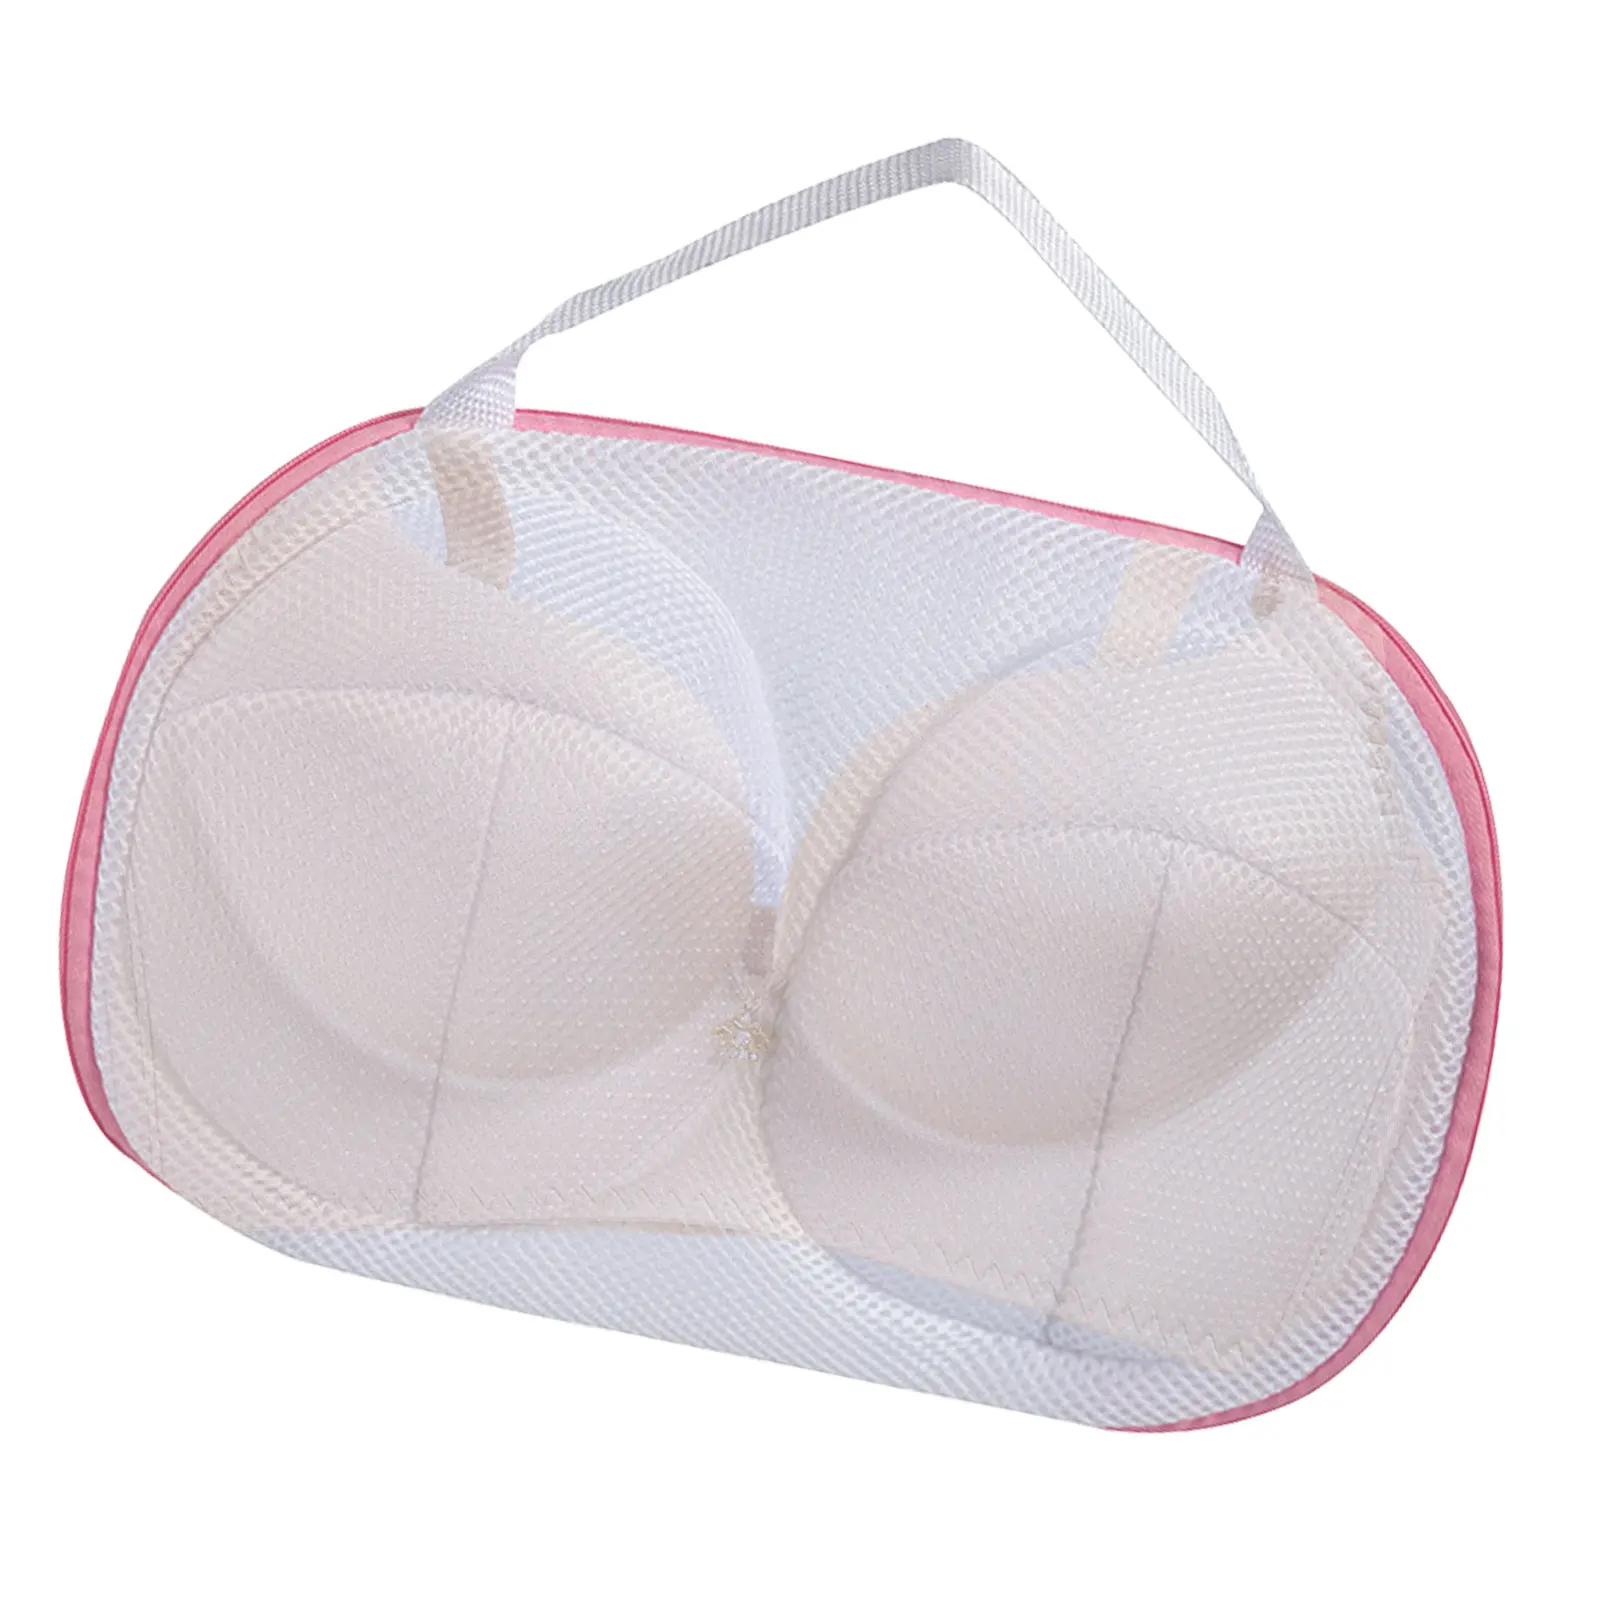 

Anti Deformation Wash Protector Laundry Bag For Household Travel Organizer Polyester Mesh Bra Underwear Special Storage Bags